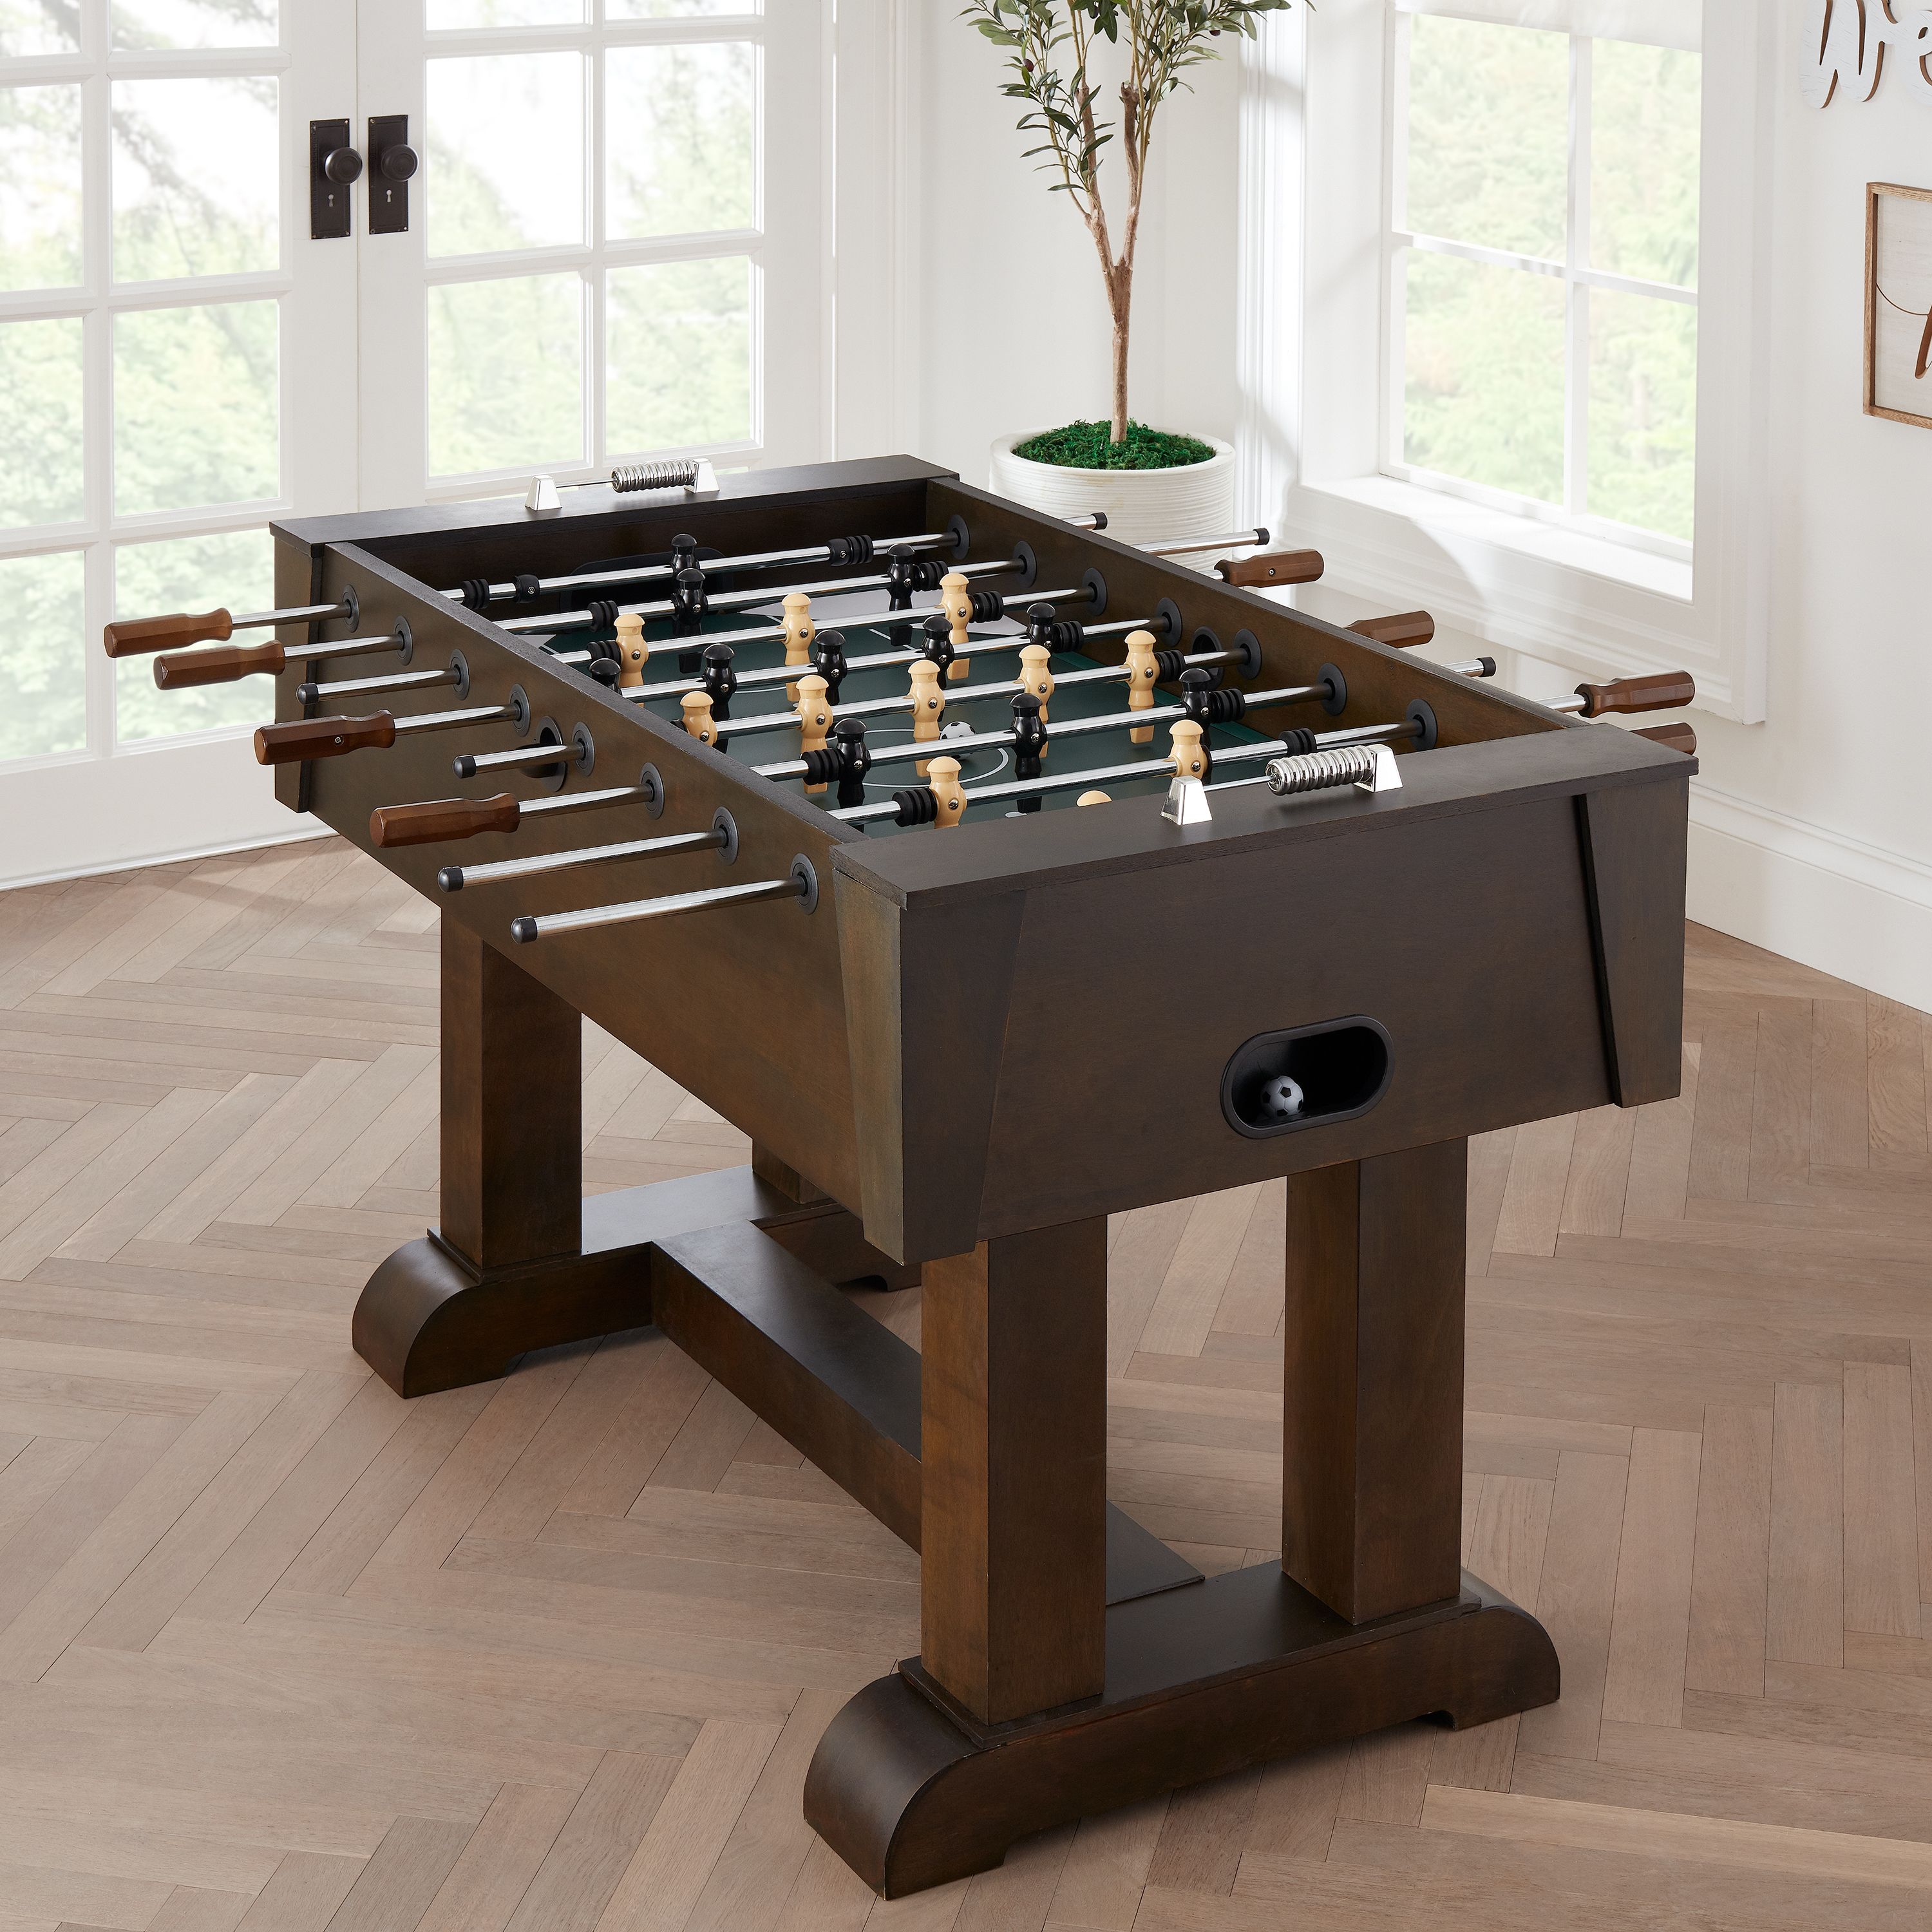 Airzone Official Size Wood Foosball Game Table, 56" - image 2 of 4